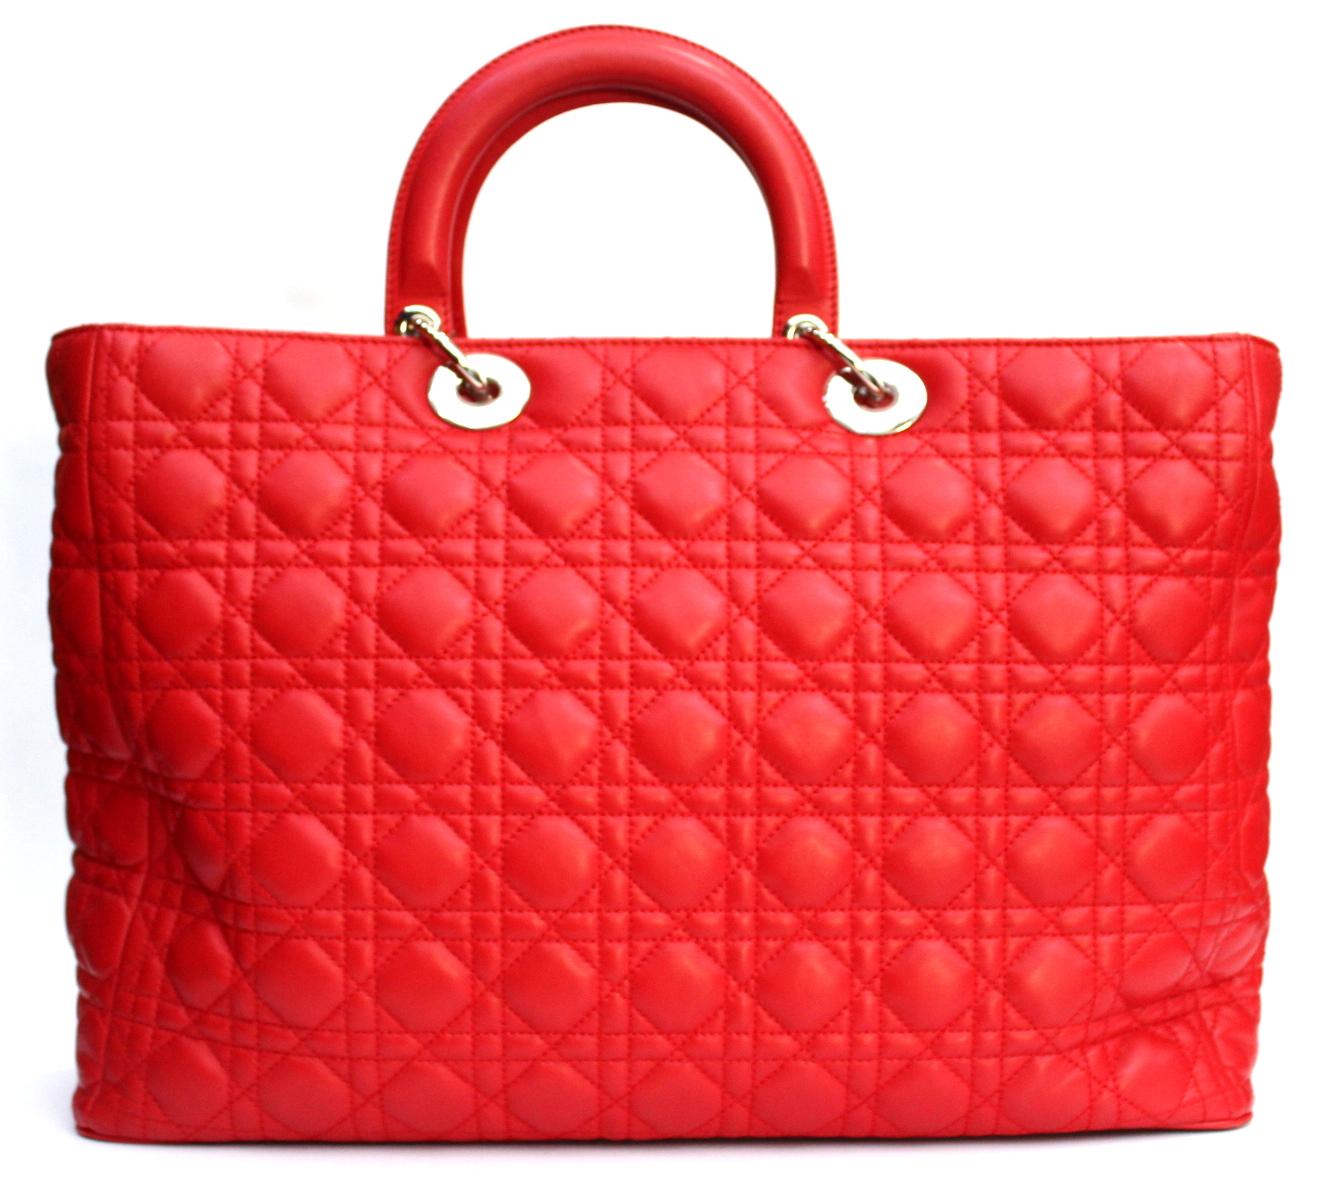 Looking for a chic and elegant bag with a vintage touch? This Christian Dior bag, Lady Dior Extra Large model is the one for you!
Made of quilted red leather with cannage embroidery, enriched with a DIOR charms, which adds a luminous touch to this